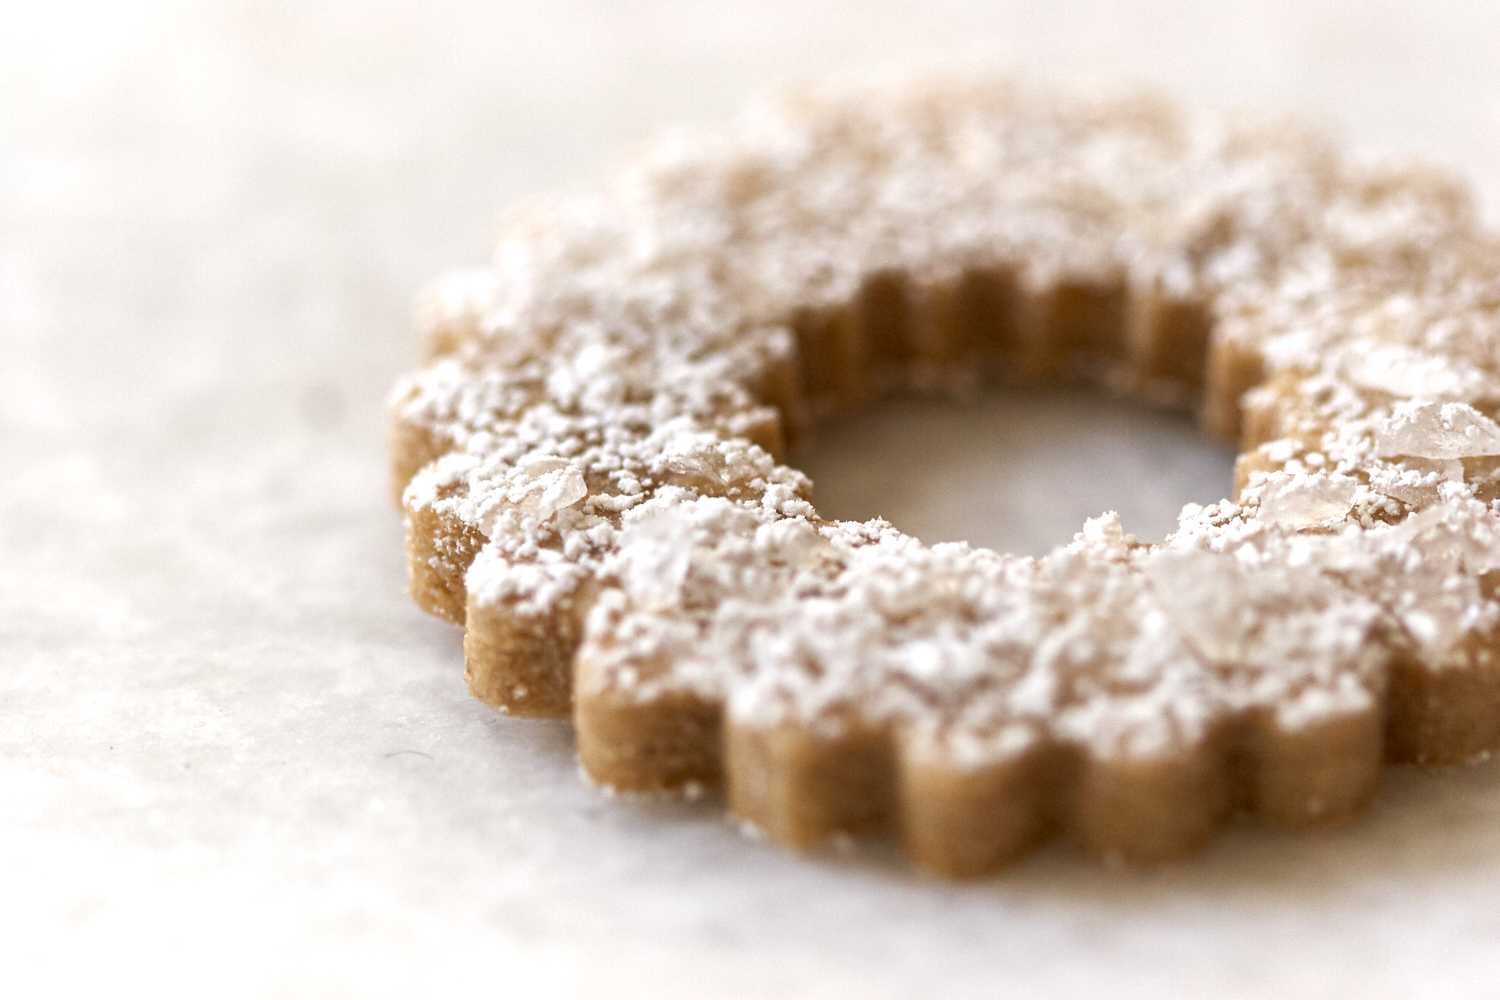 Swedish rye cookies as part of 15 festive Christmas cookie recipes list